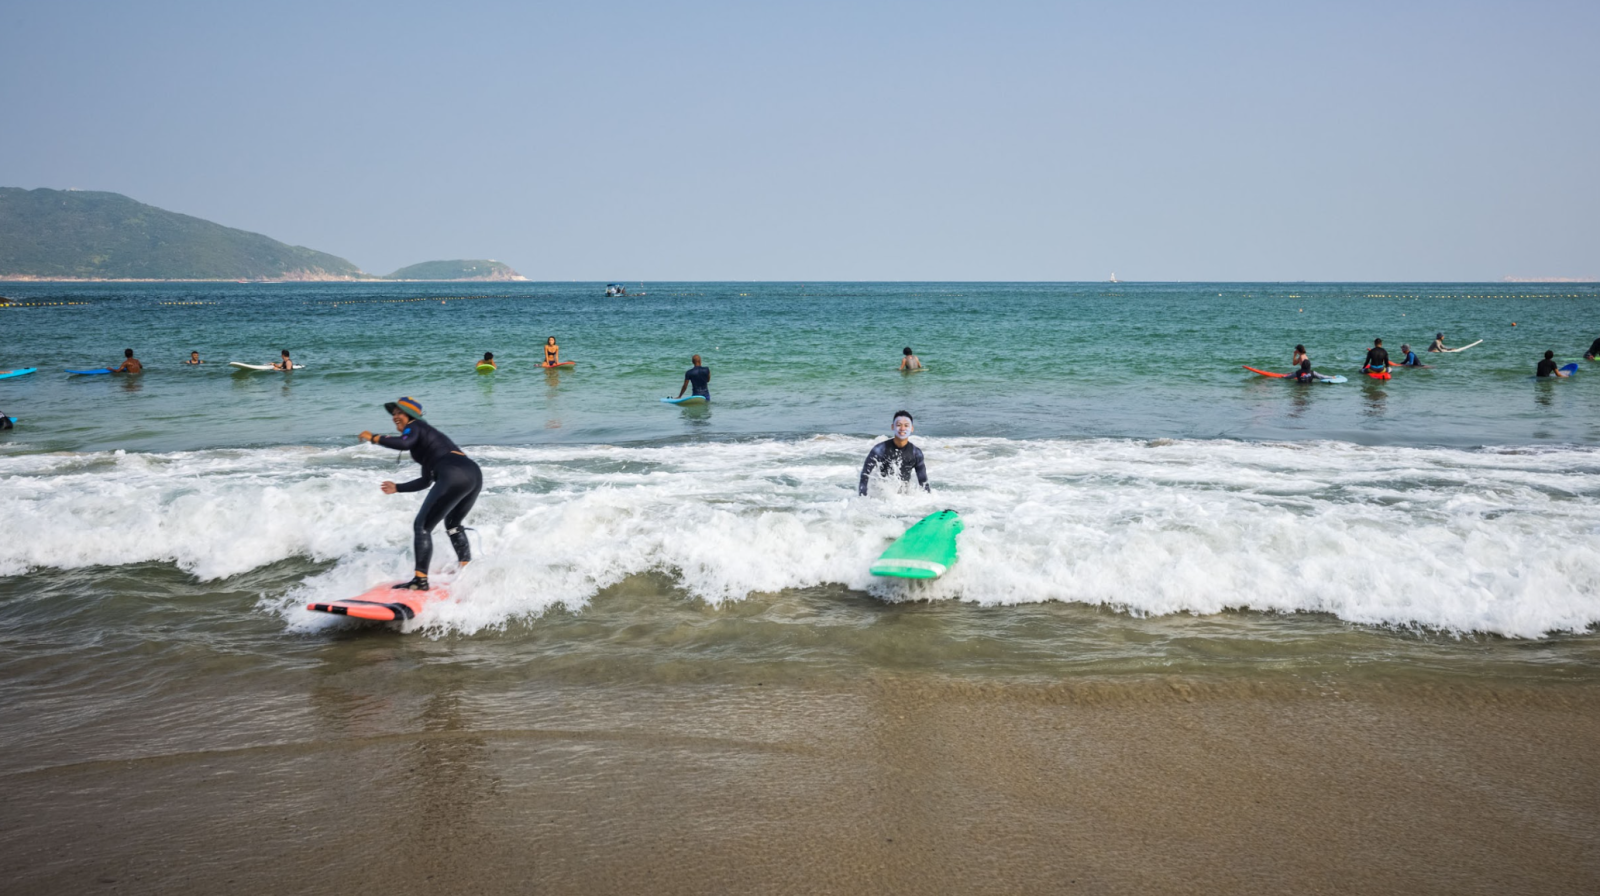 A perfect spot where everyone can enjoy surfing and other watersports with an affordable price